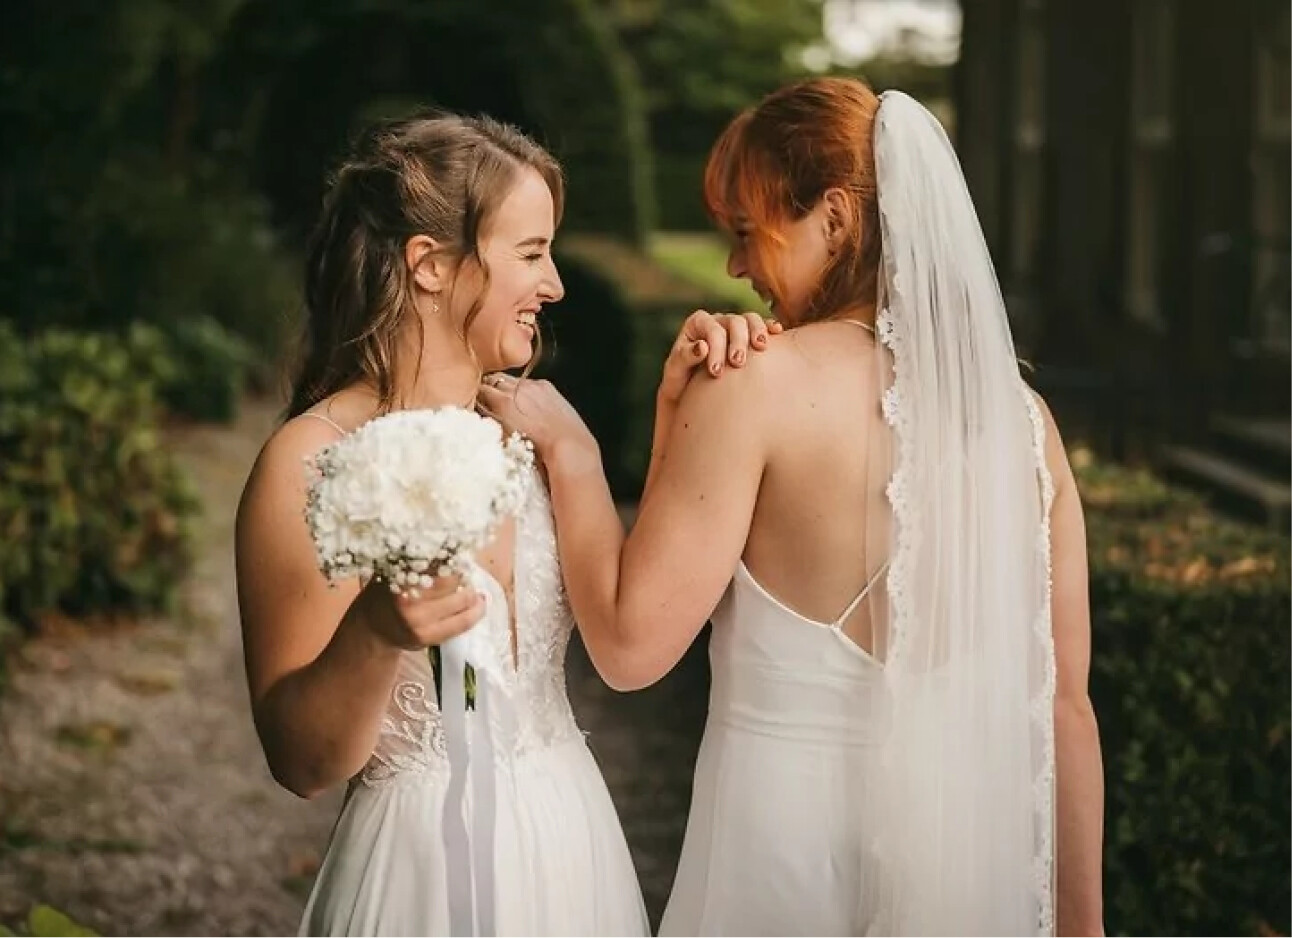 Laura en Cathelijne Married at first sight